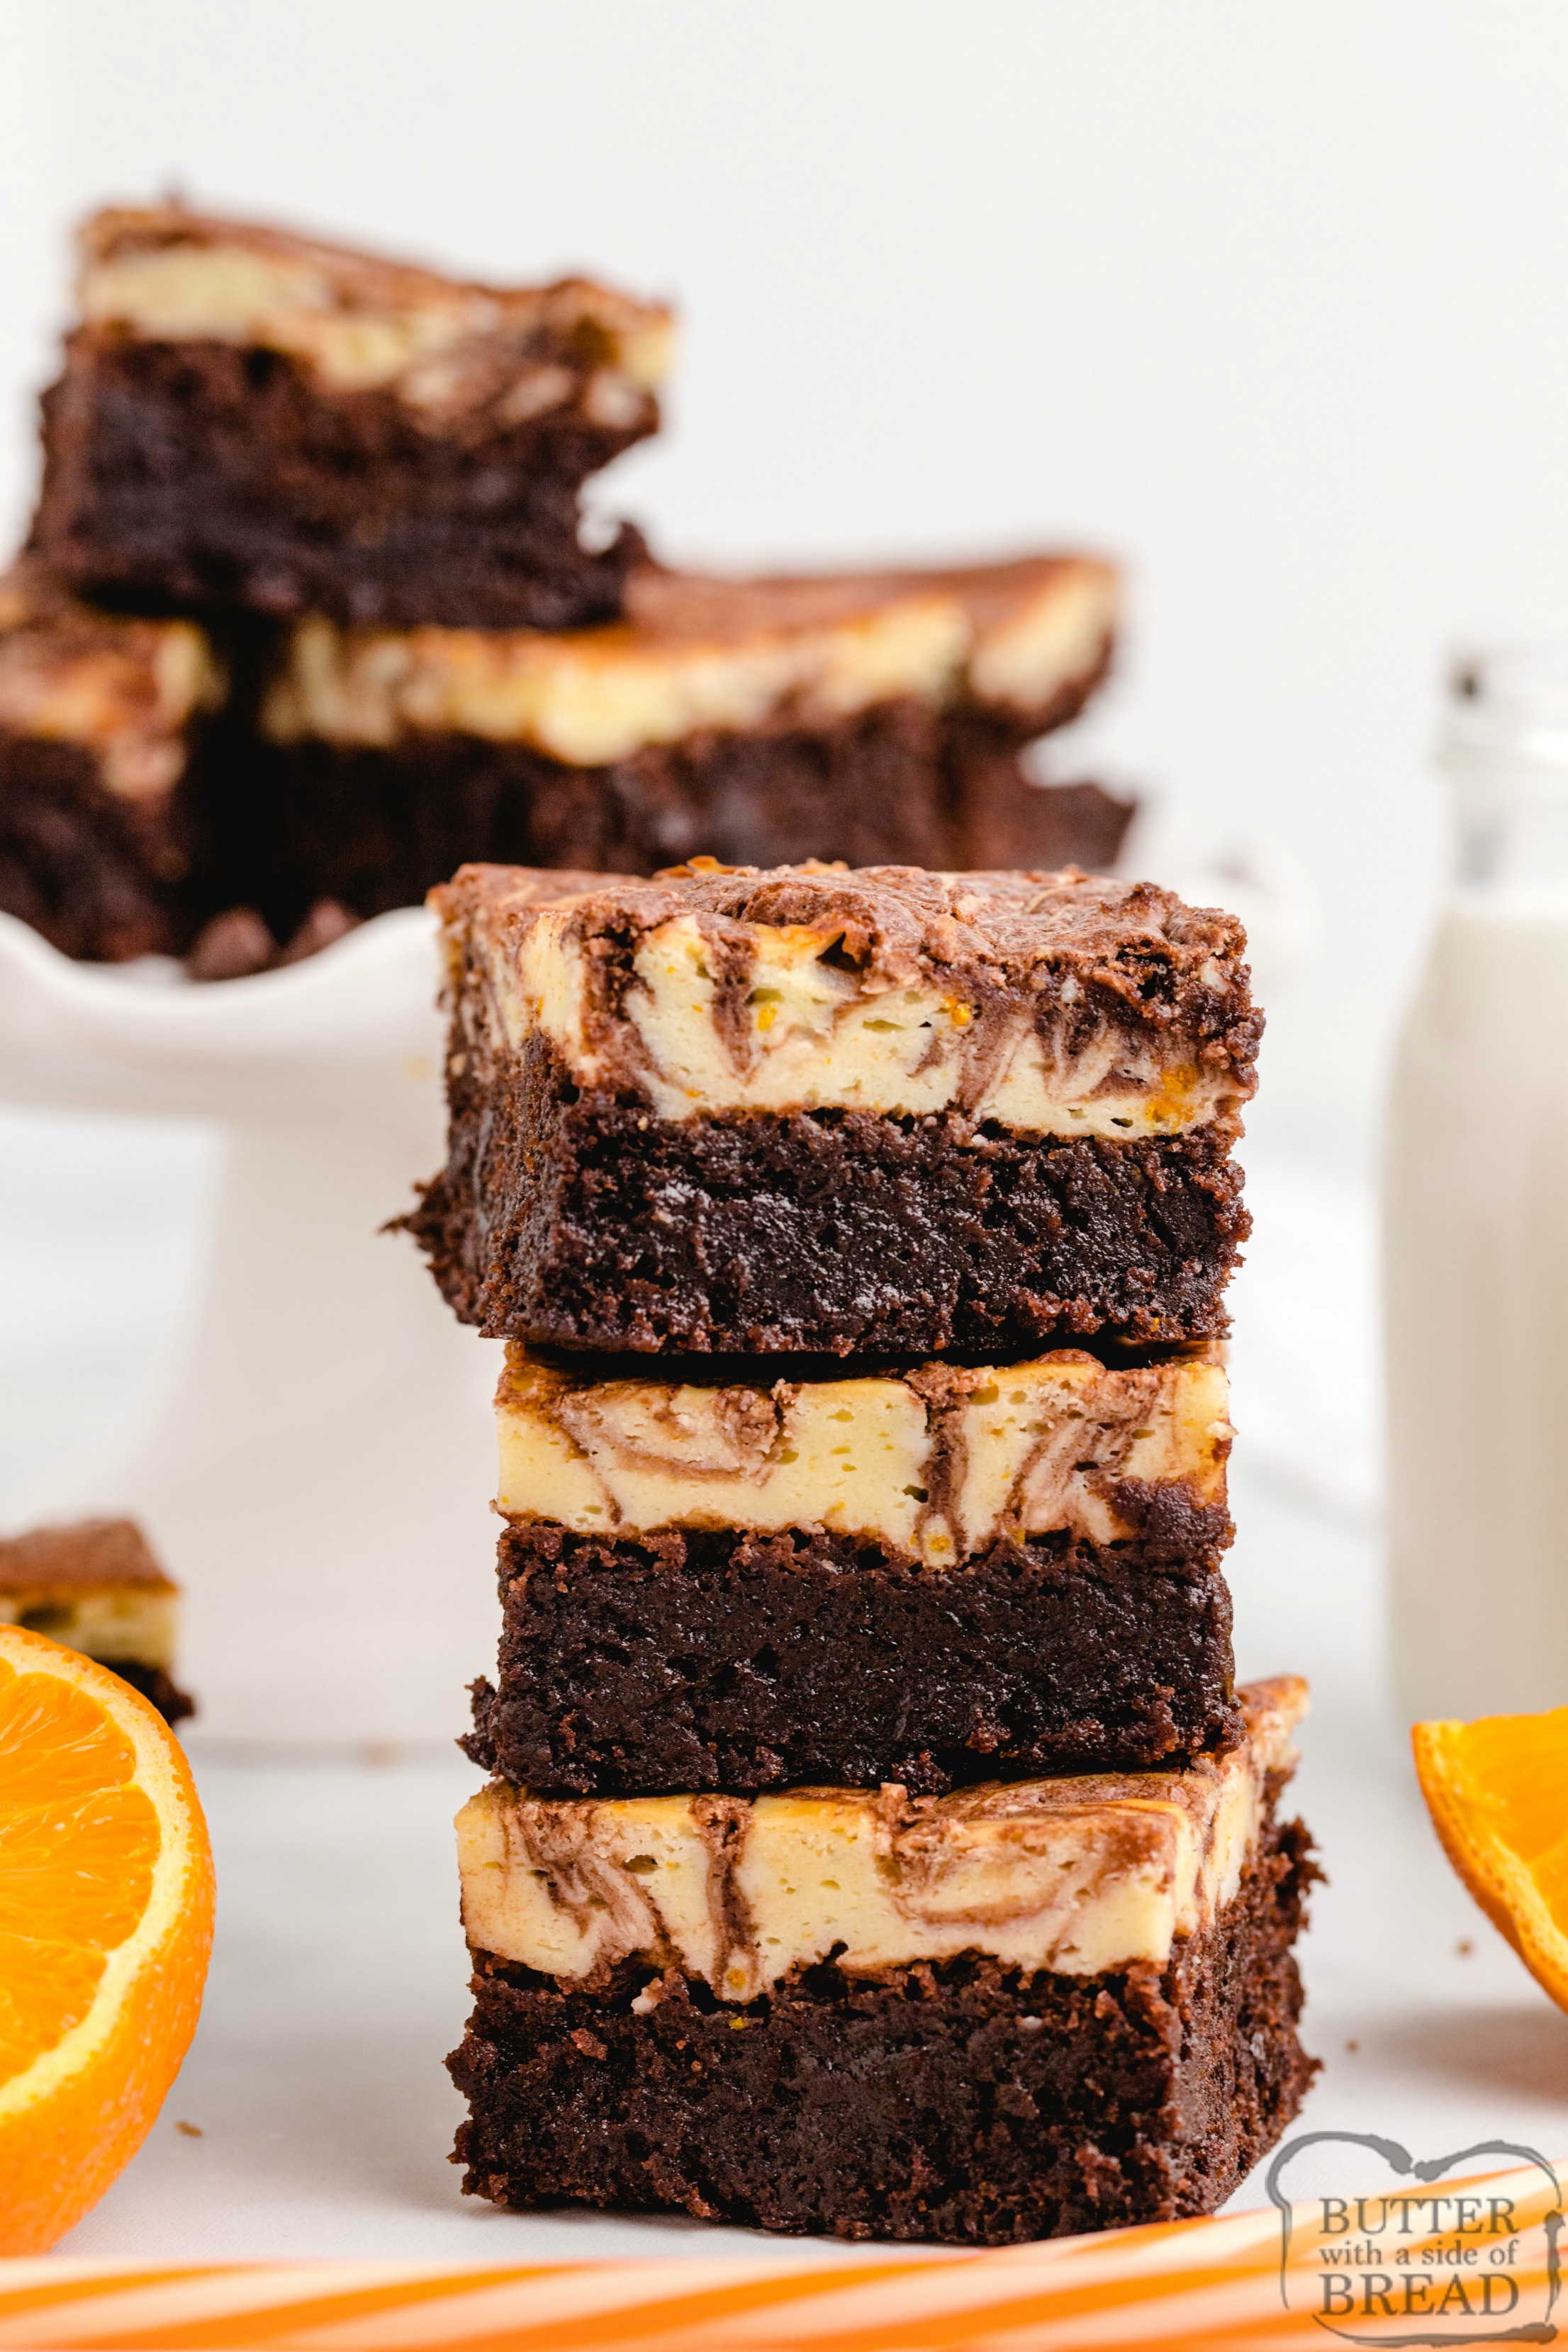 Orange Cheesecake Brownies made with a delicious orange cheesecake layer that is swirled with a simple brownie mix. The orange and chocolate combination is absolutely incredible! 